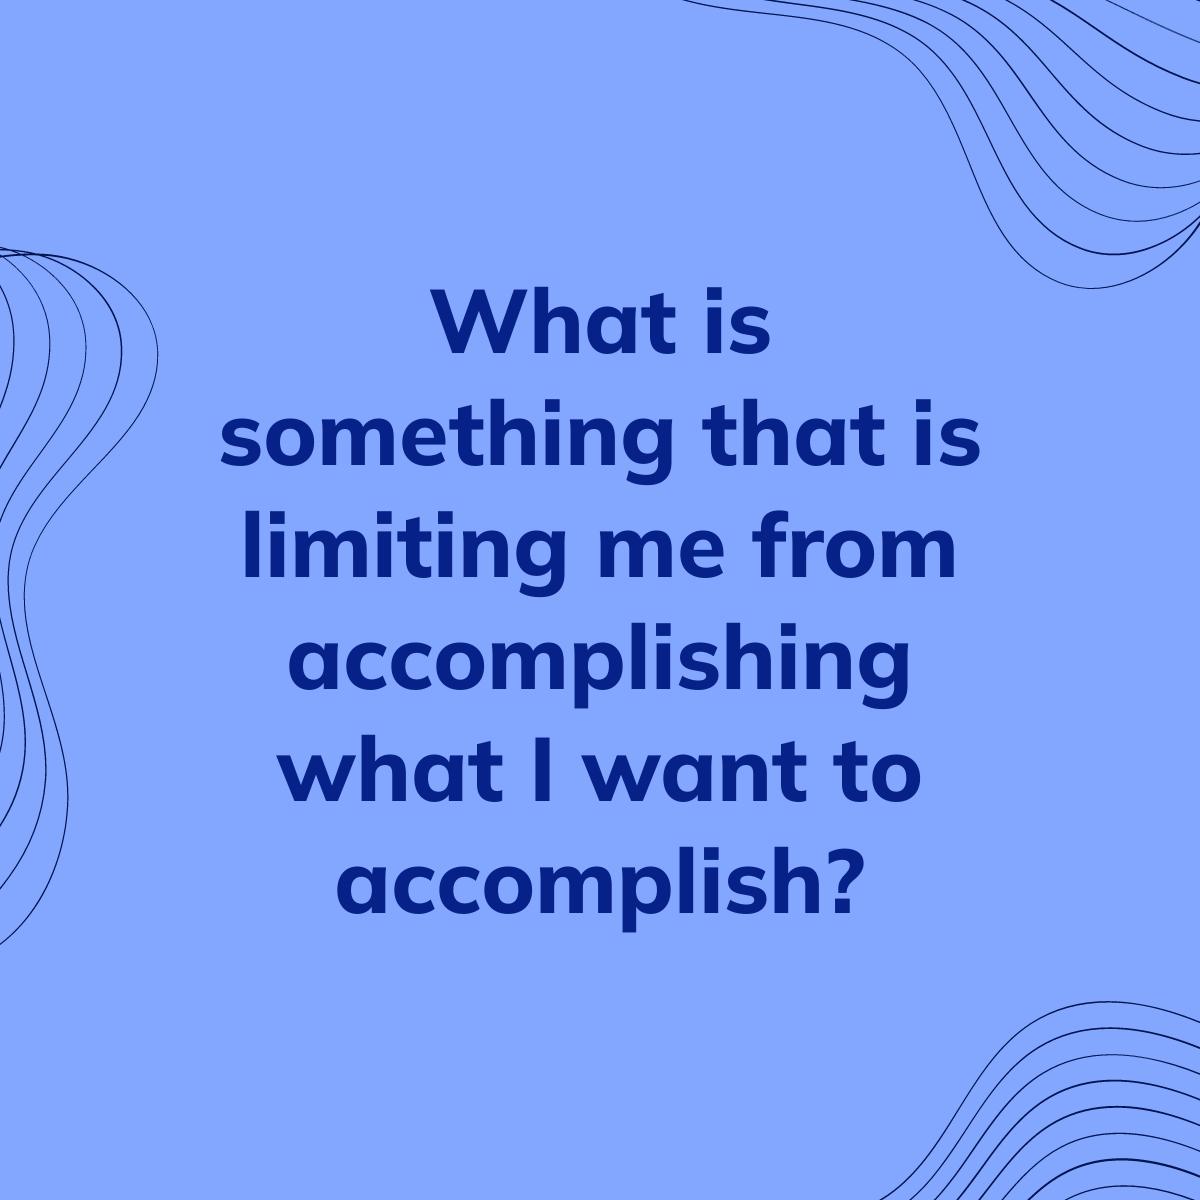 Journal Prompt: What is something that is limiting me from accomplishing what I want to accomplish?